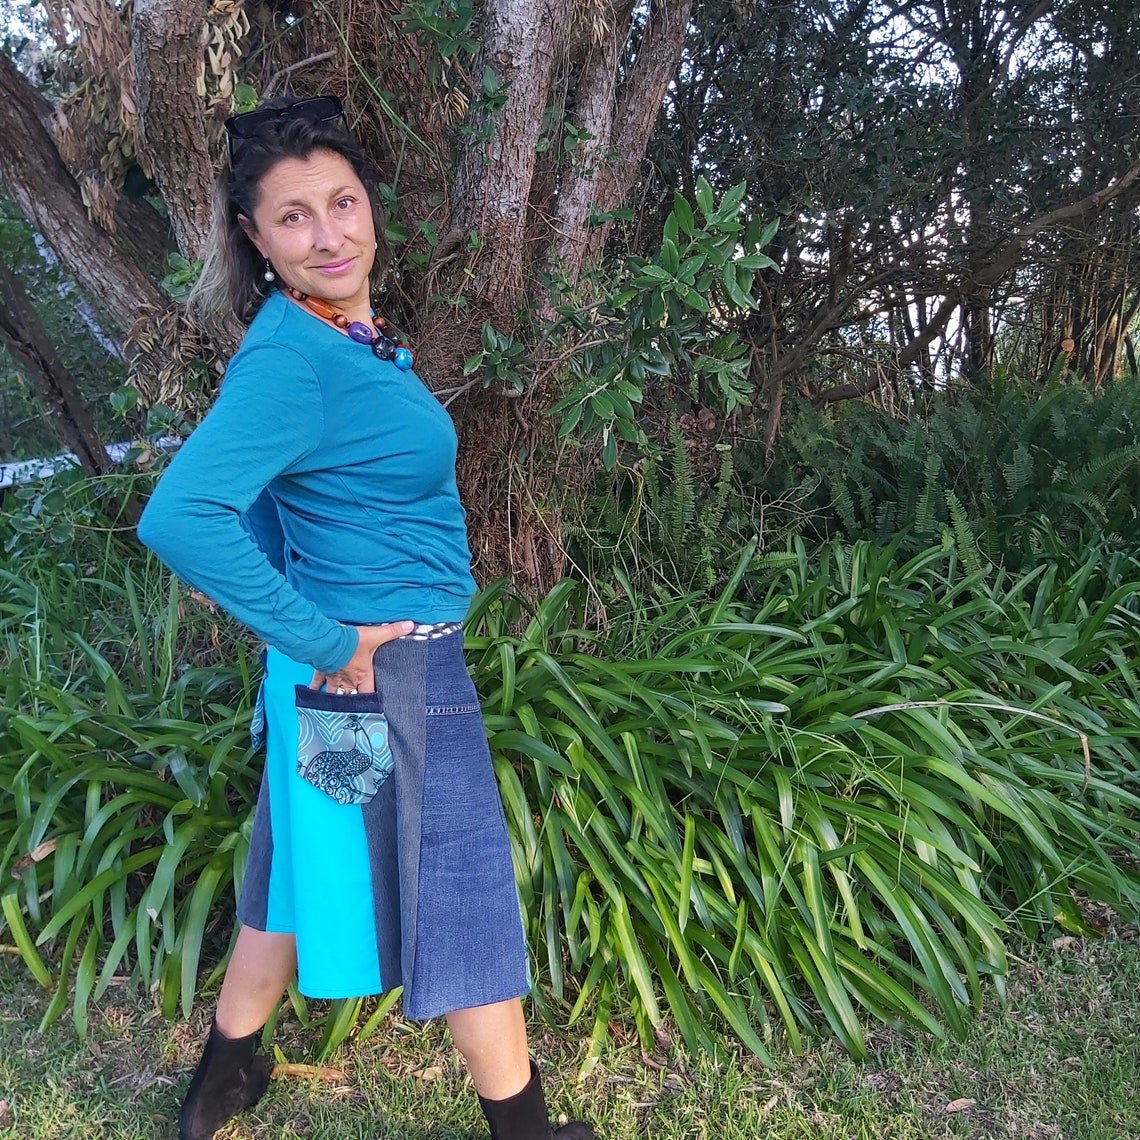 Denim and tourquise Skirt With Peacock print - Heke design